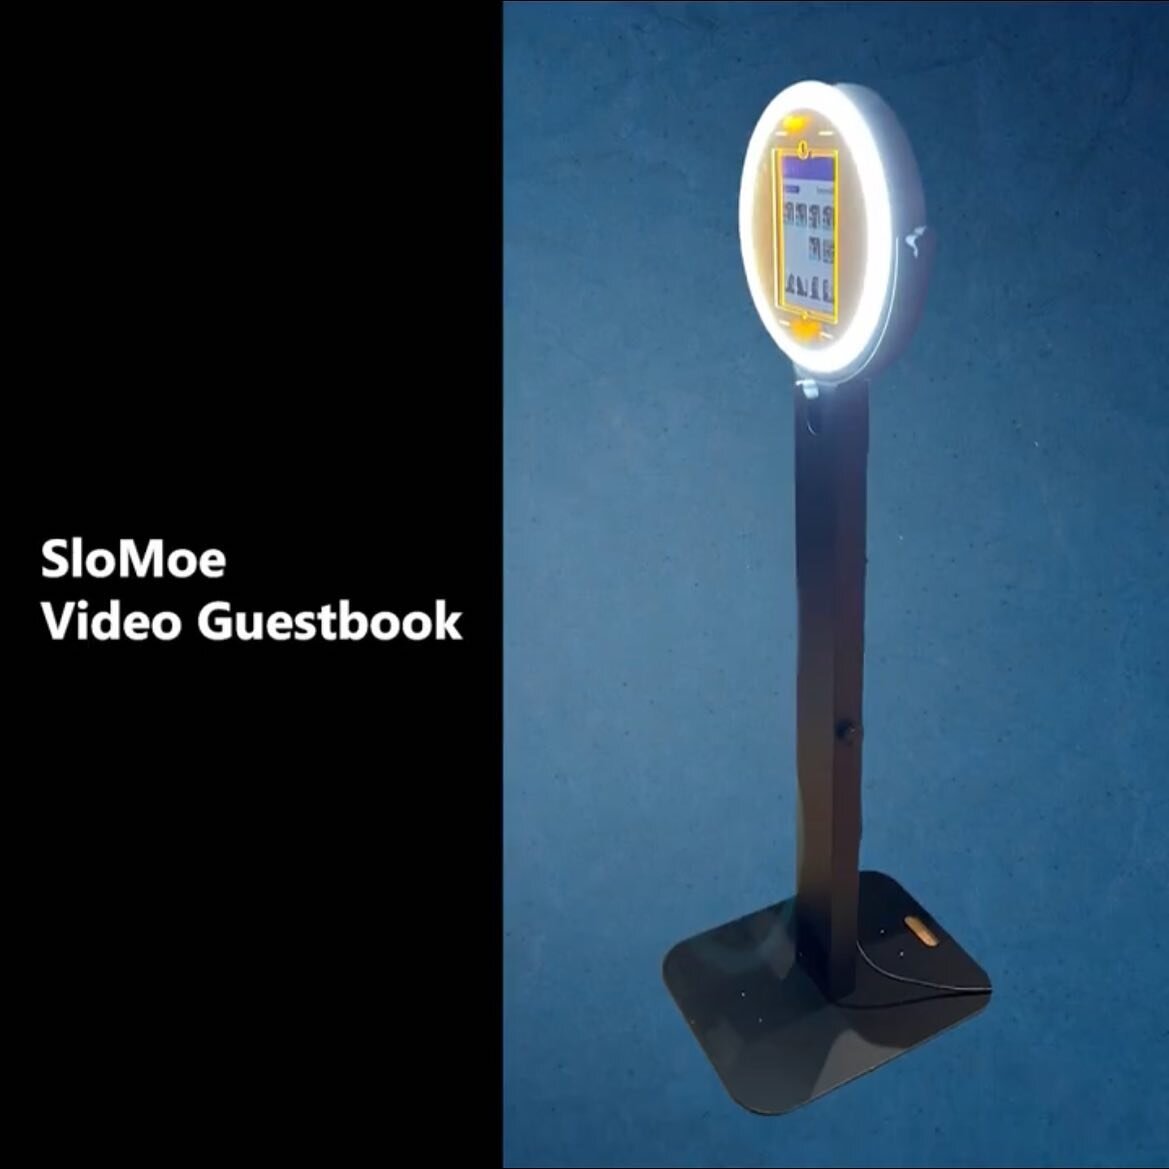 Introducing the SloMoe Video Guestbook, the modern guestbook. Contact us today to learn more